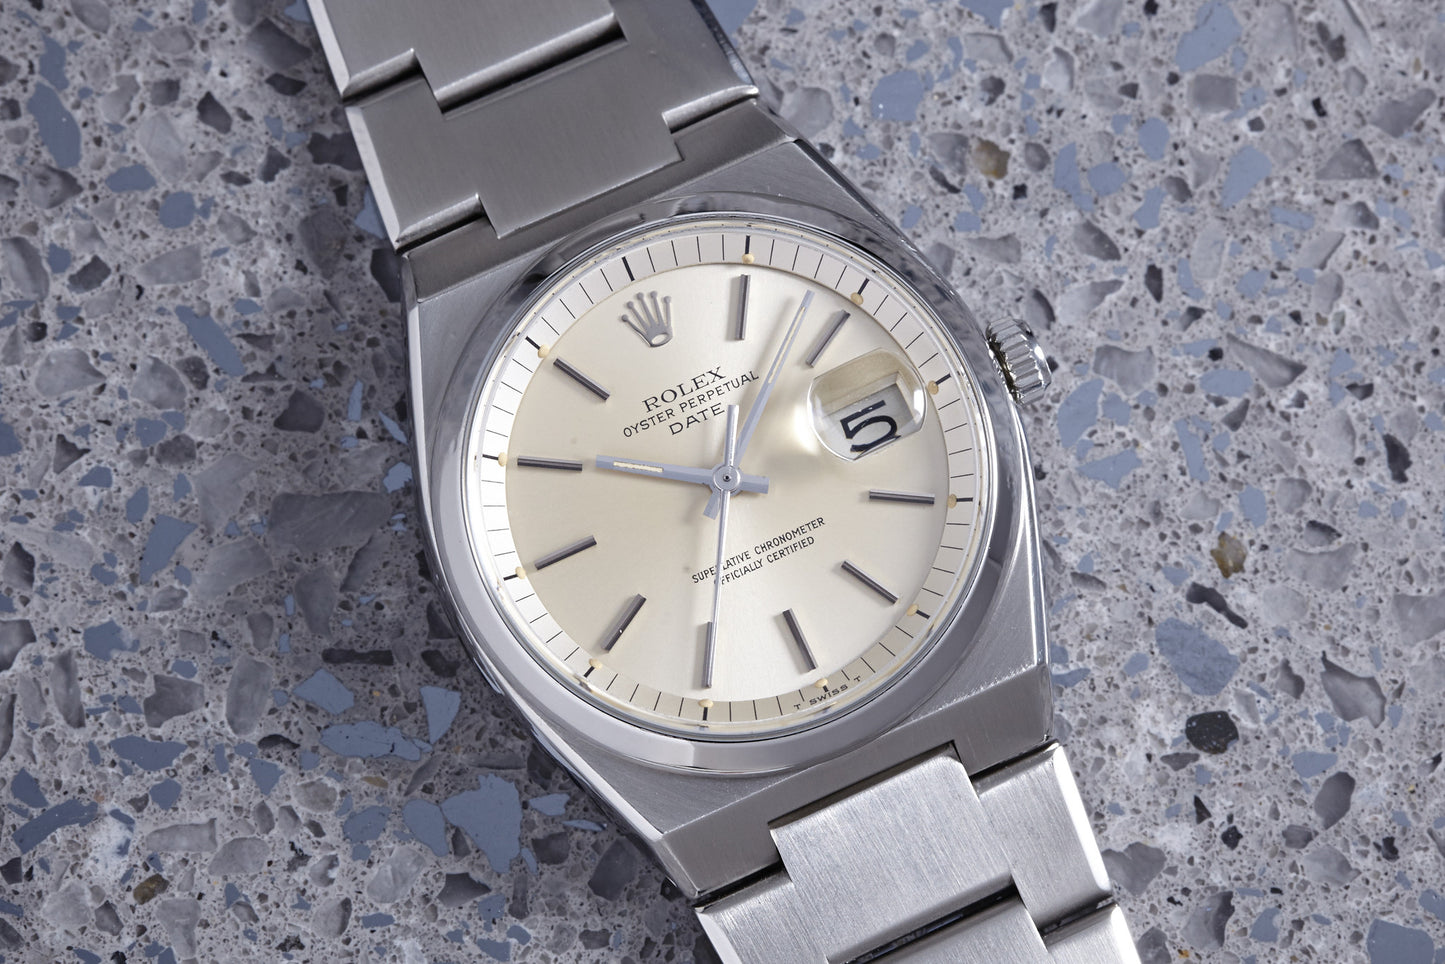 Rolex Reference 1530 Oyster Perpetual Date